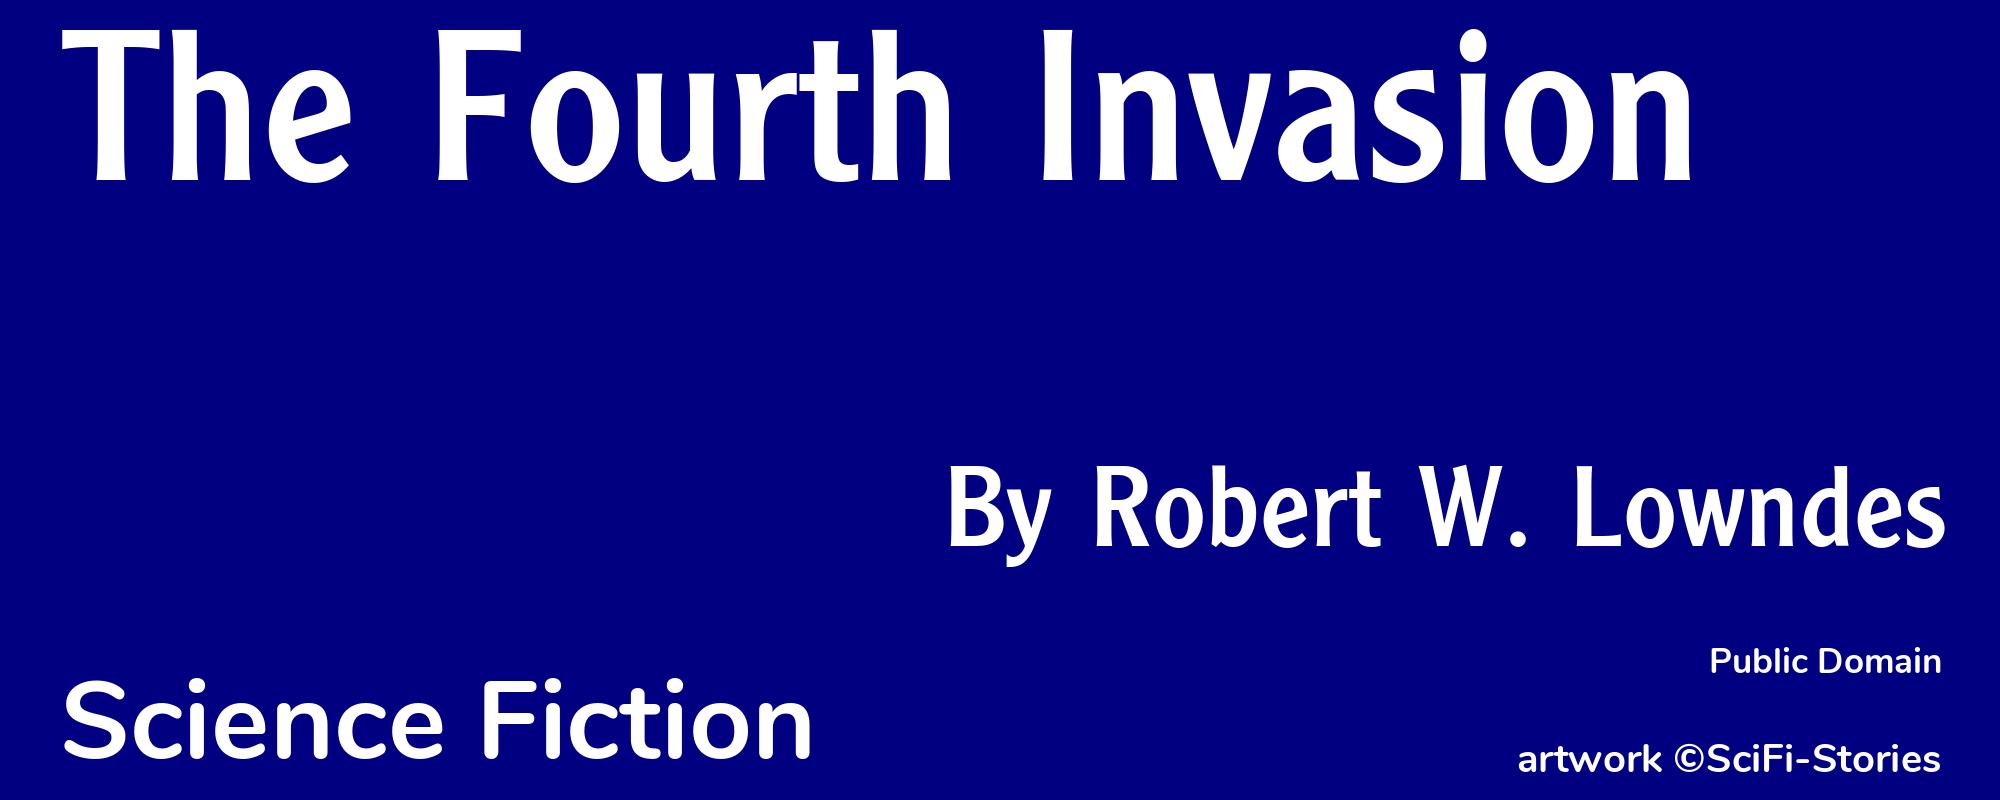 The Fourth Invasion - Cover